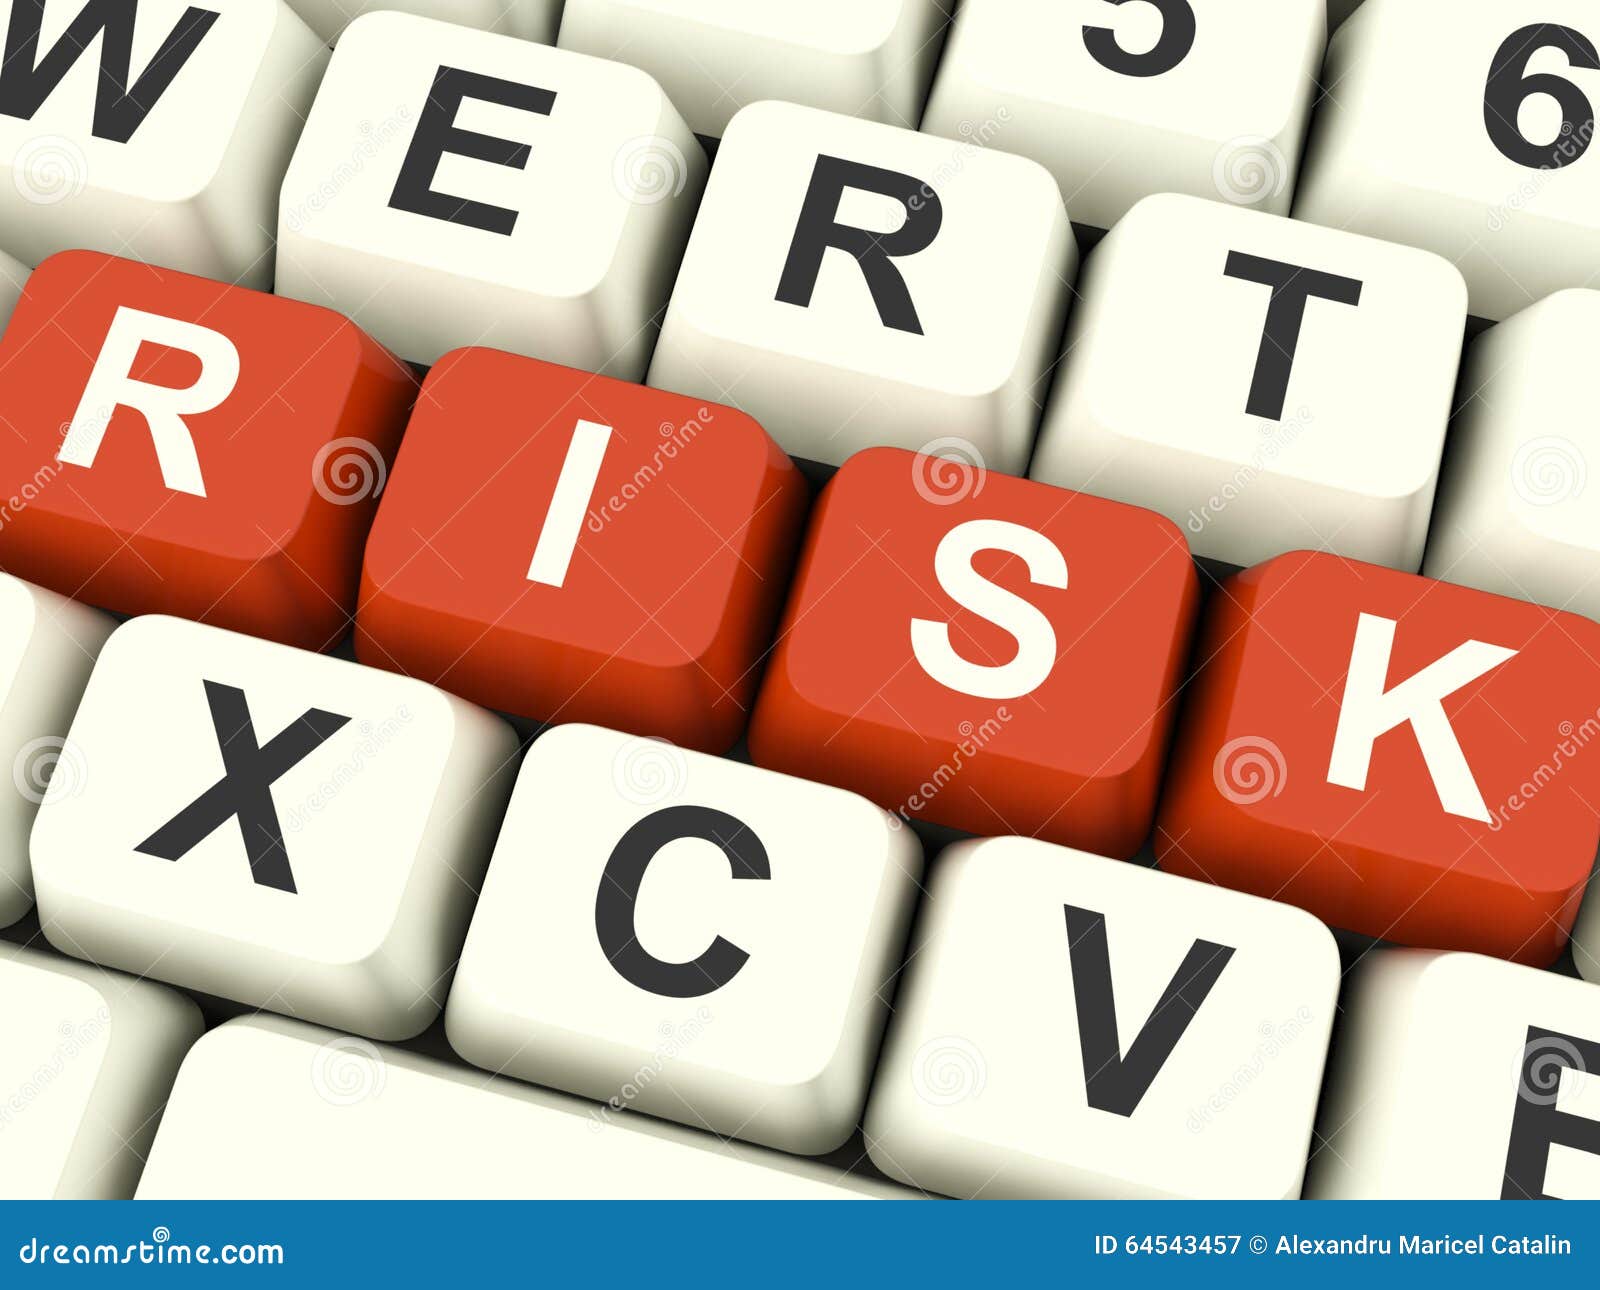 risk computer keys showing peril and uncertainty